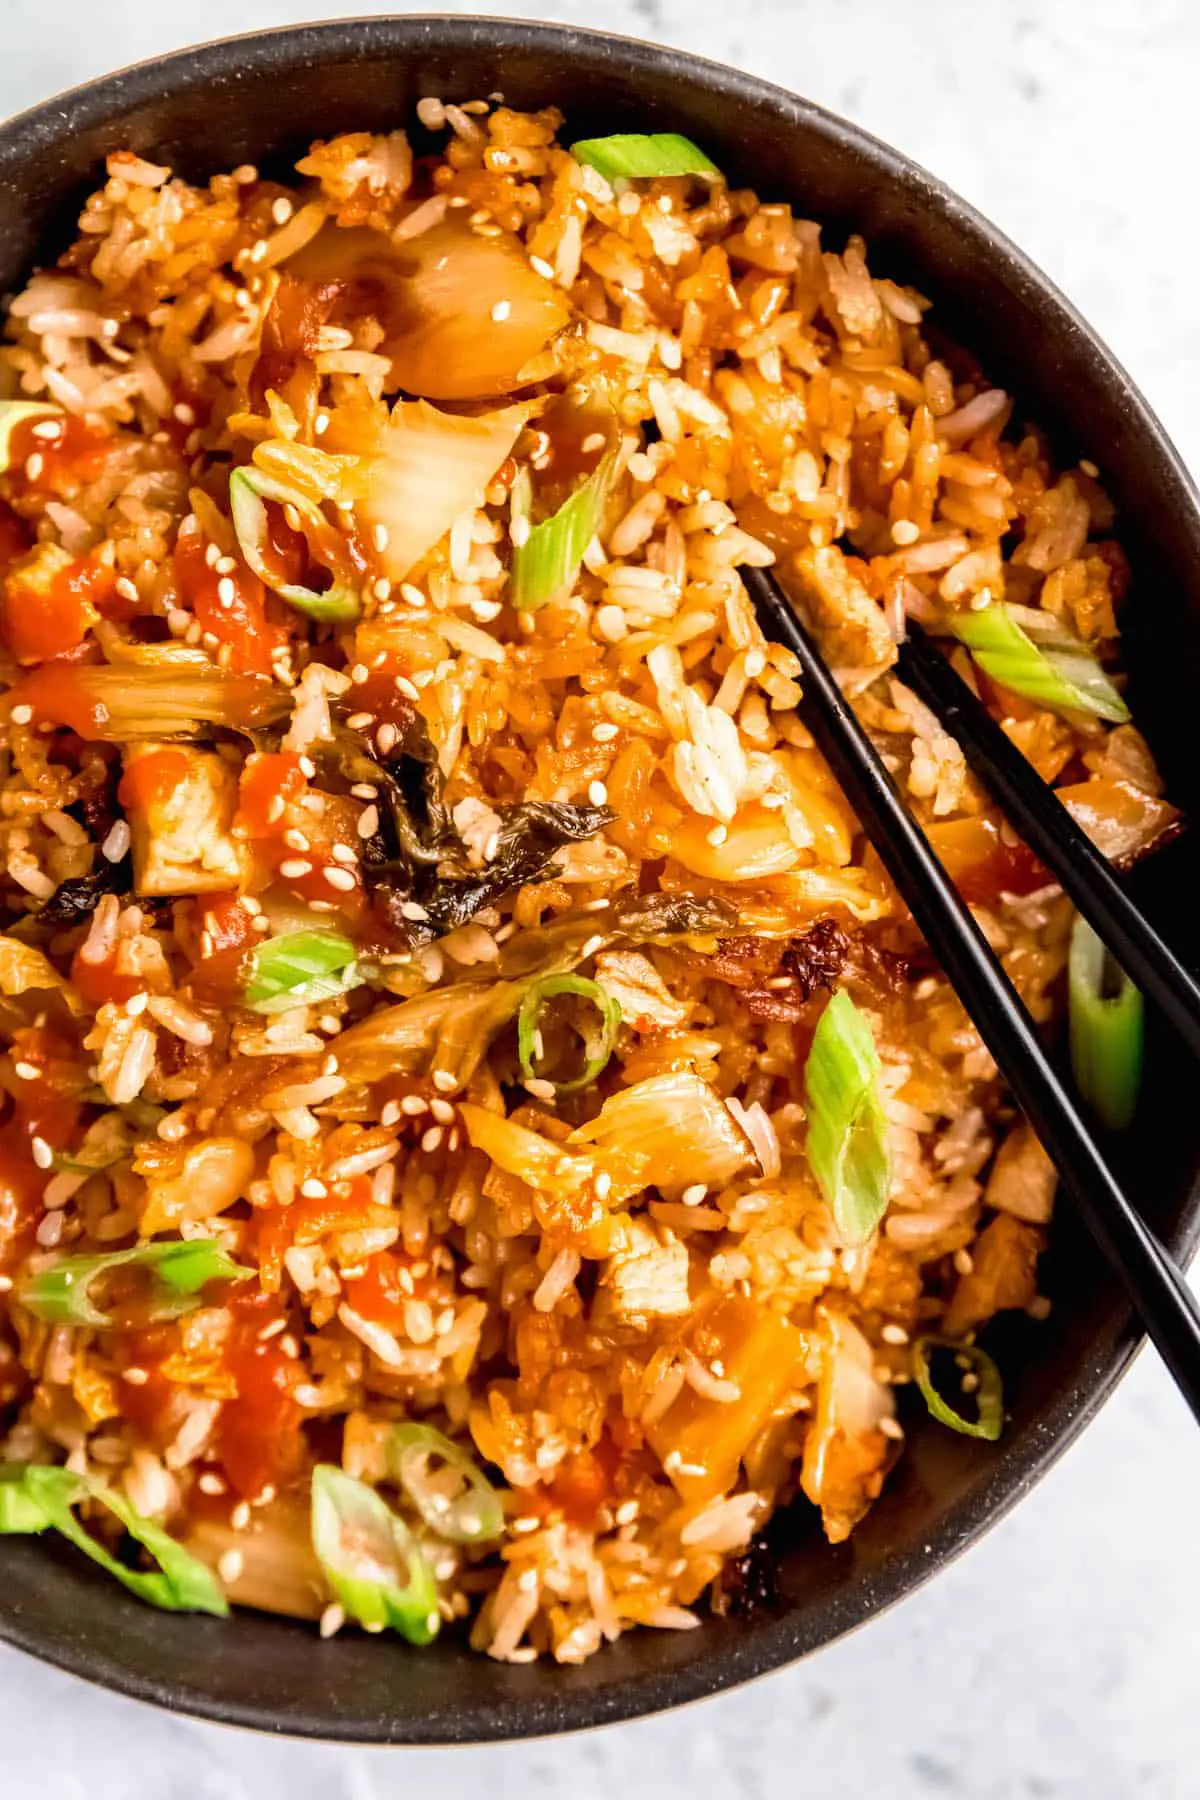 Flat lay shot of a bowl of BBQ pork fried rice as an example of a versatile recipe.